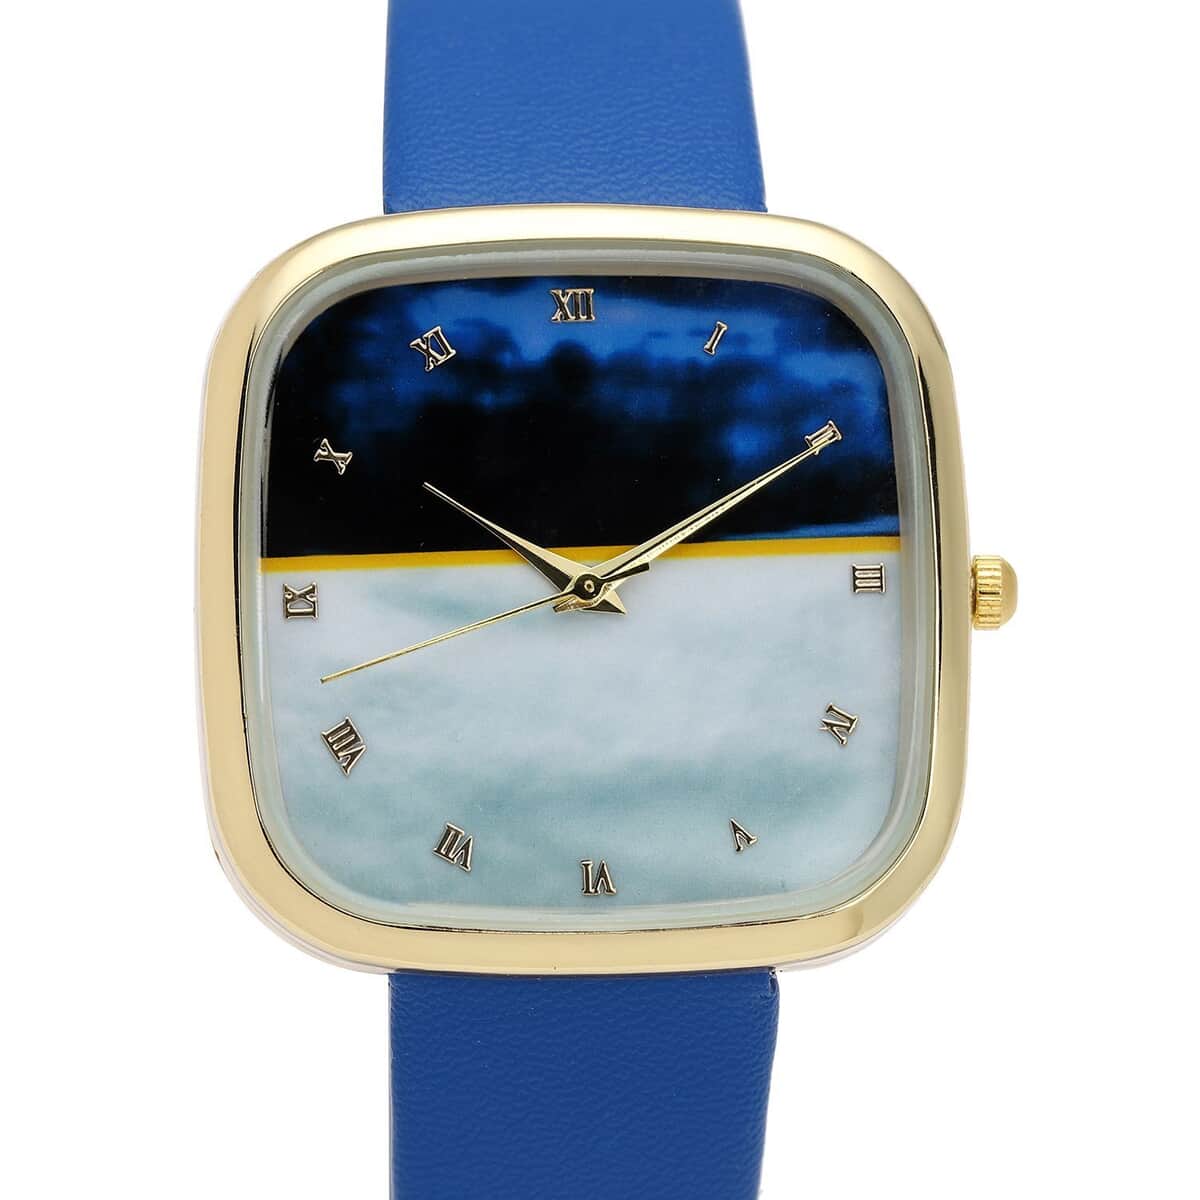 Strada Japanese Movement 3D Simulated Lapis Dial Watch in Blue Faux Leather Strap (35.80mm) (5.5-7.5 Inches) image number 3